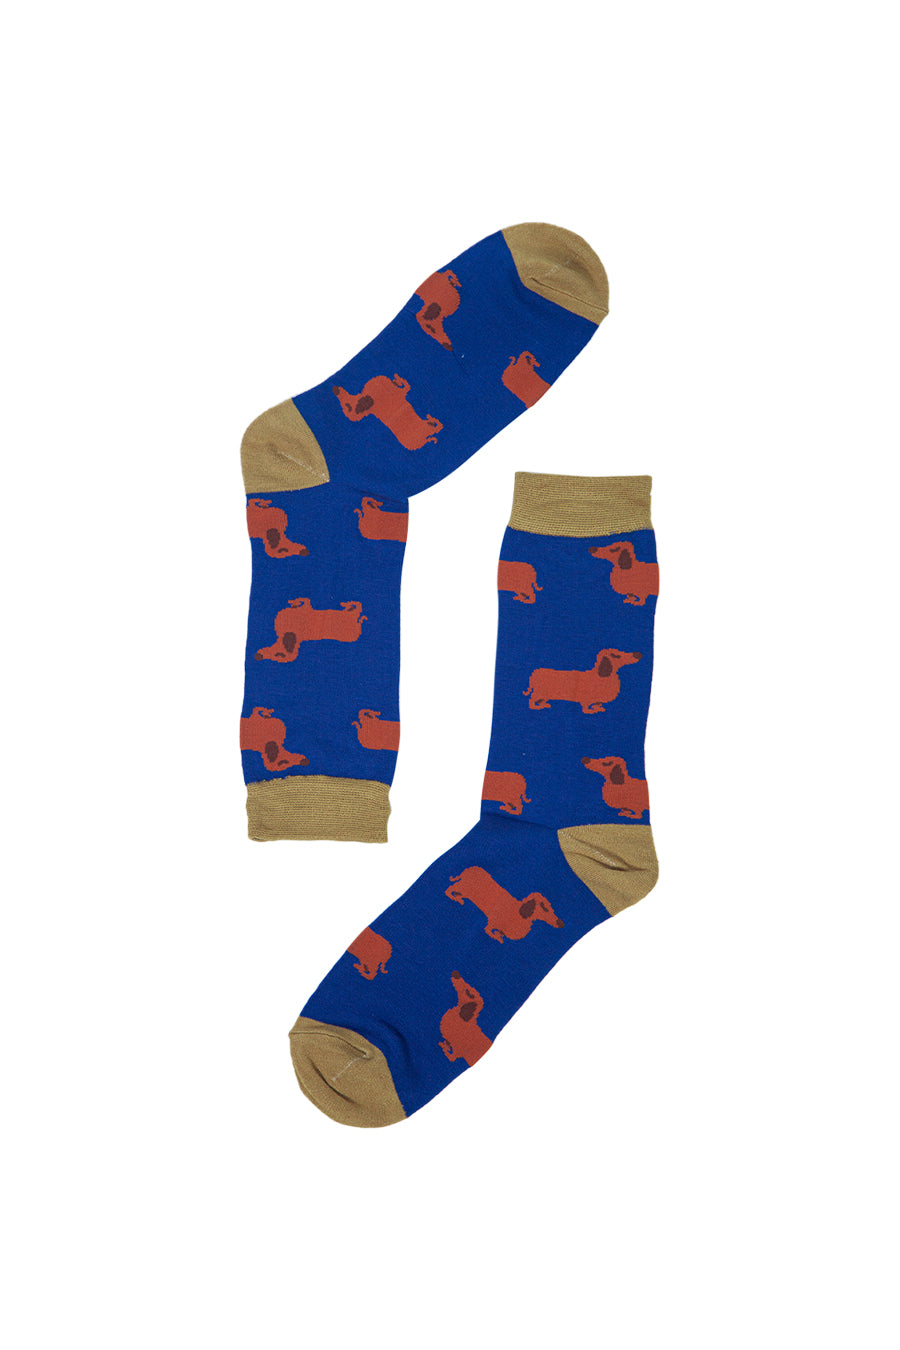 blue bamboo socks with miniature dachshunds on them